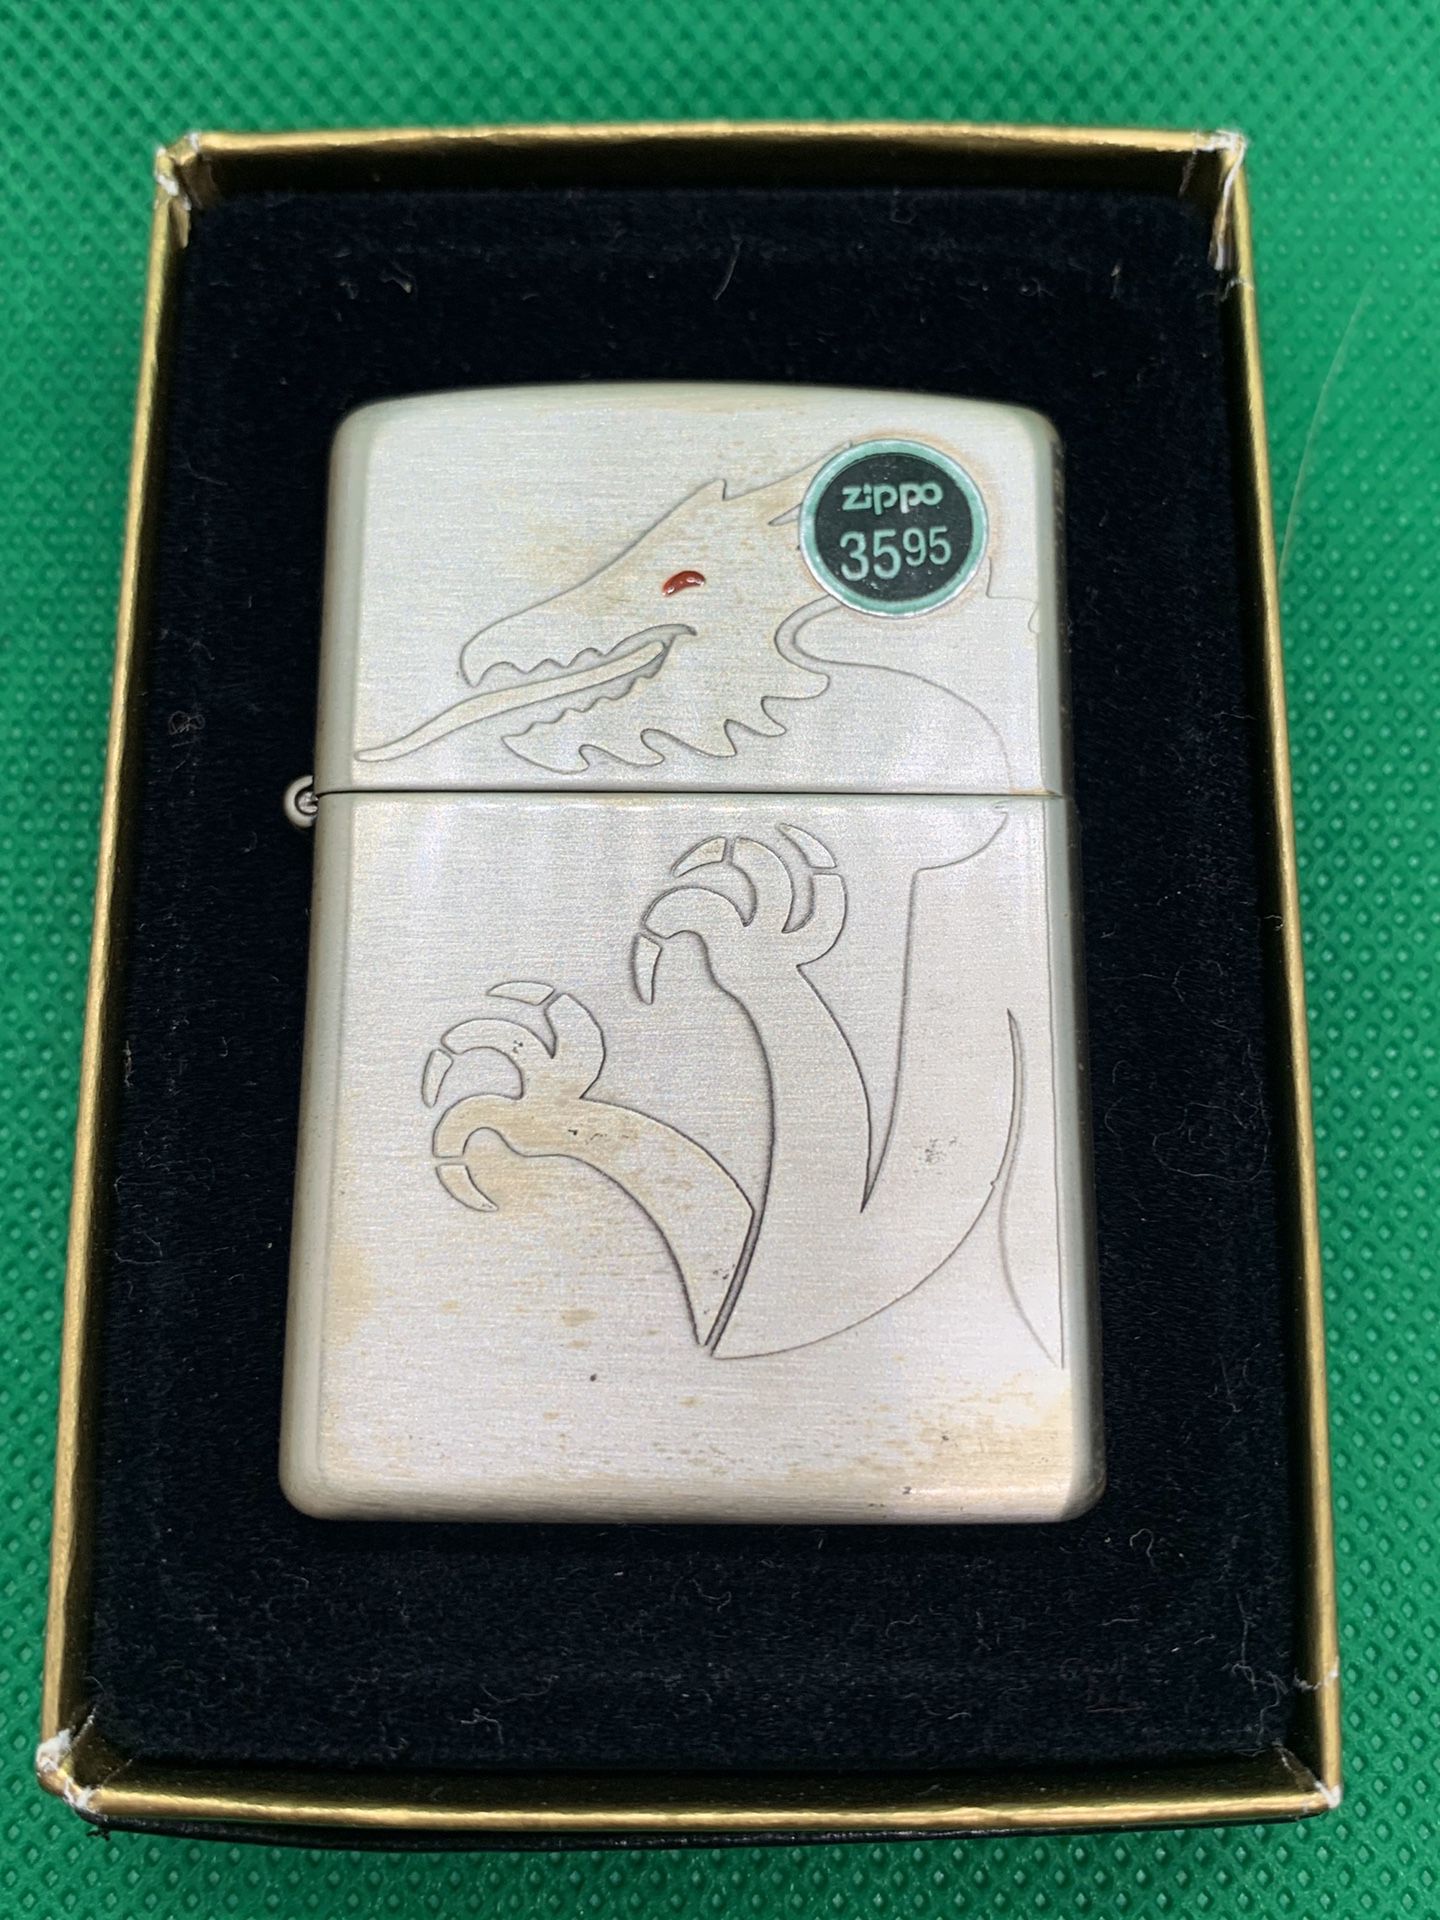 Zippo Lighter new never used or opened